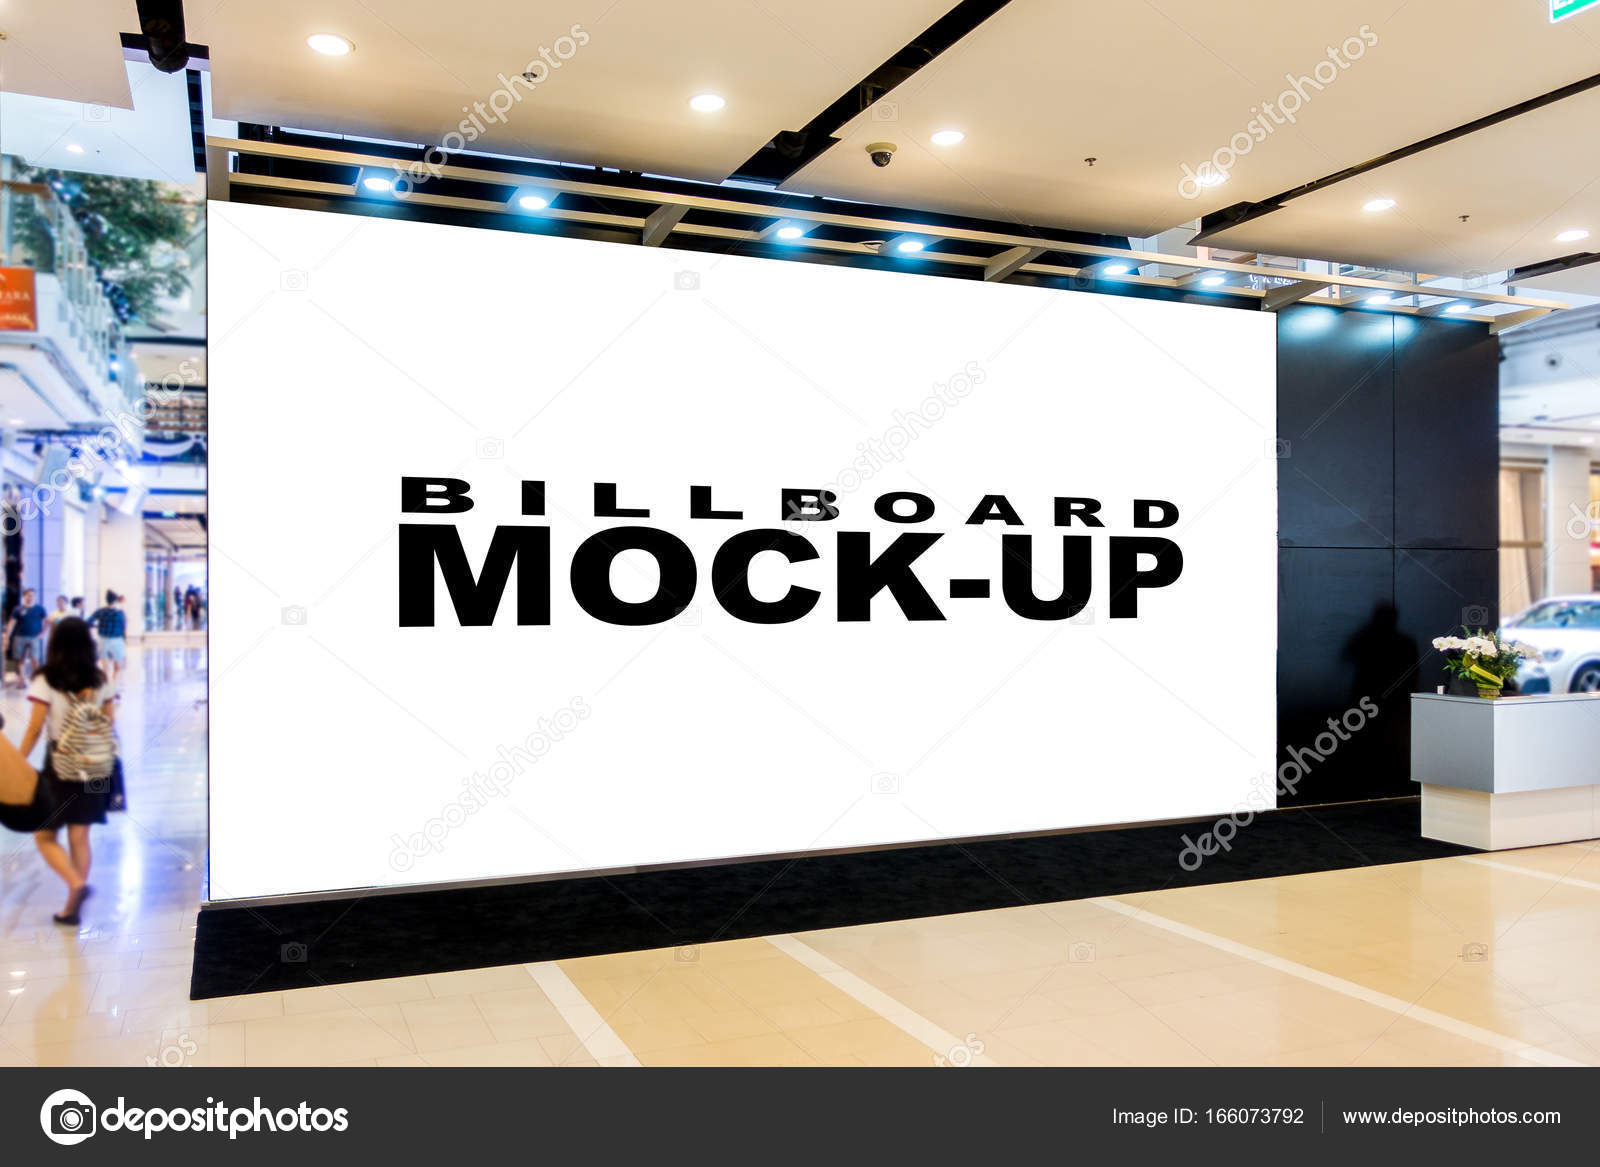 Download Blank Billboards Located In Shopping Mall Stock Photo Image By C Pixs4u 166073792